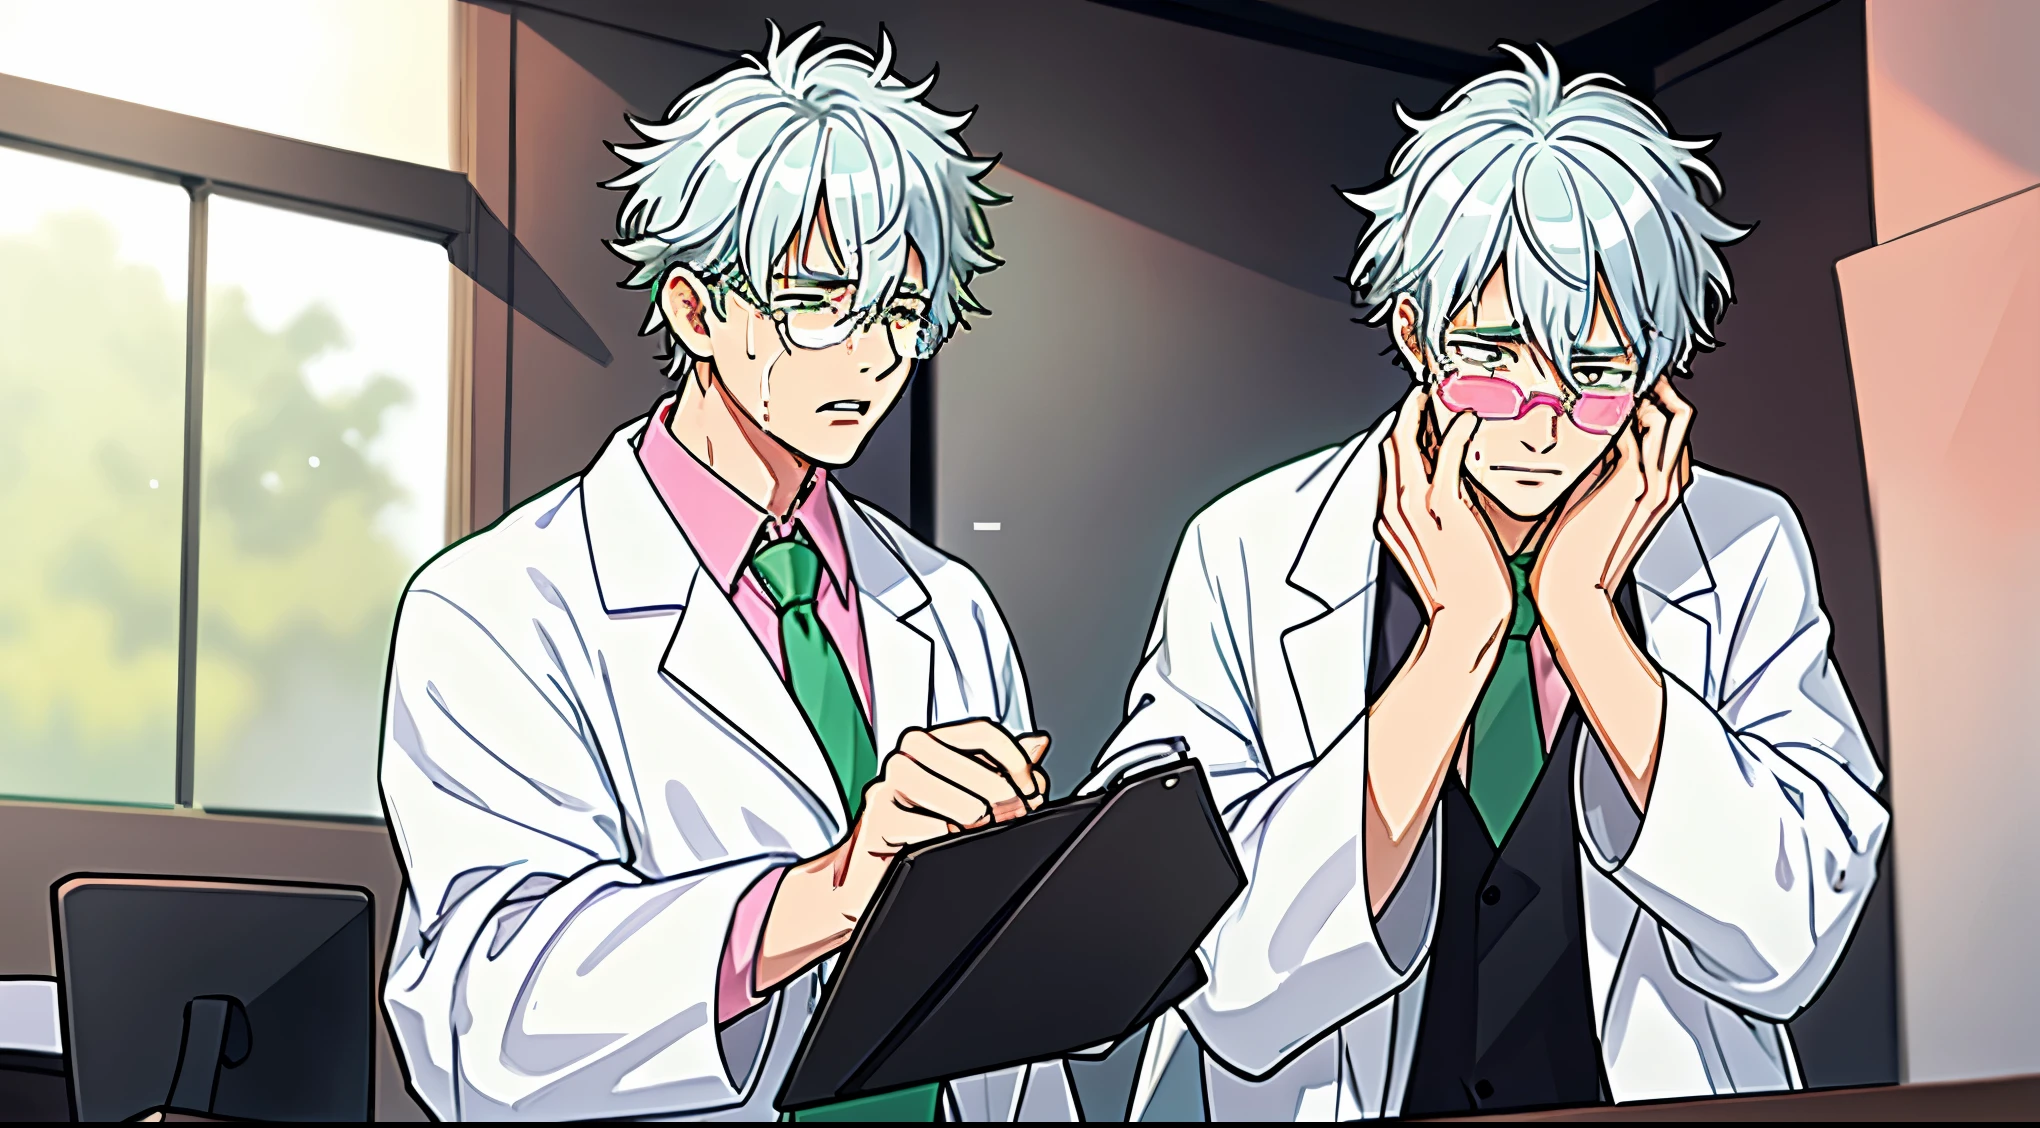 Silver-haired guy wearing medical glasses, wearing a white lab coat and black and pink shirt with a green tie, he is crying, tears flowwing from his eyes as he removes his medical glasses and rubbs his eyes